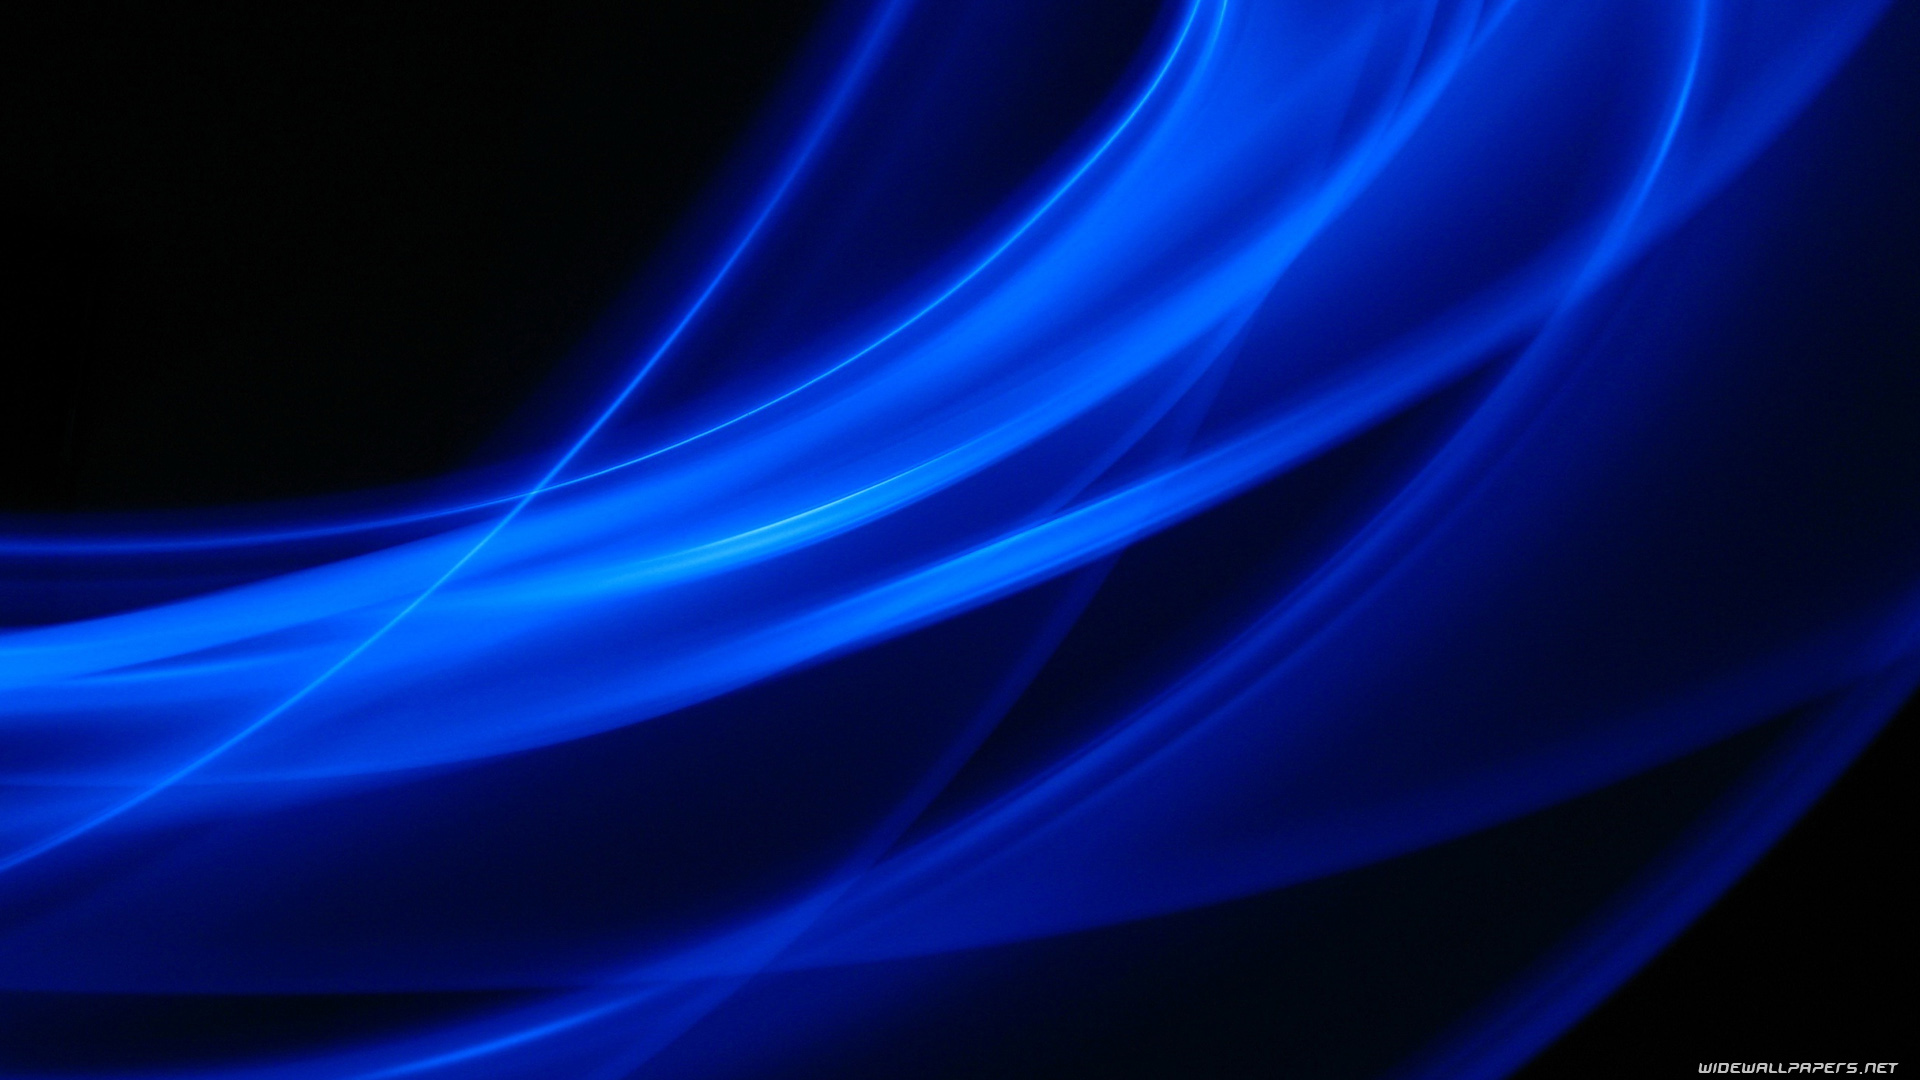 Black and Blue Abstract Widescreen HD Wallpaper 1920x1080